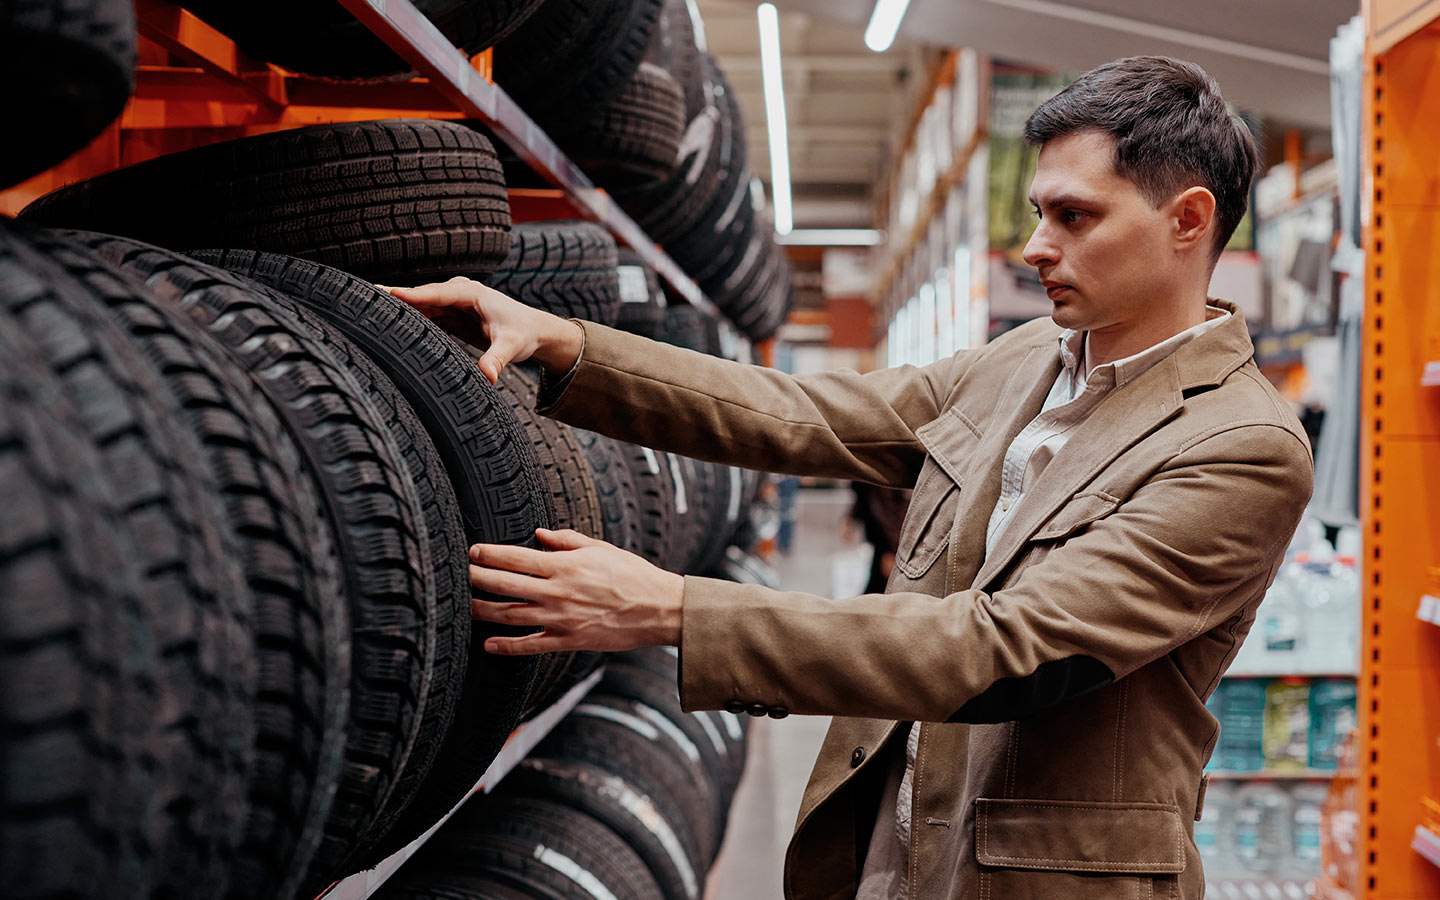 Looking to Buy New Tires in Waukegan, IL This Year. Find Out the Top 10 Tire Shops in Waukegan You Should Visit